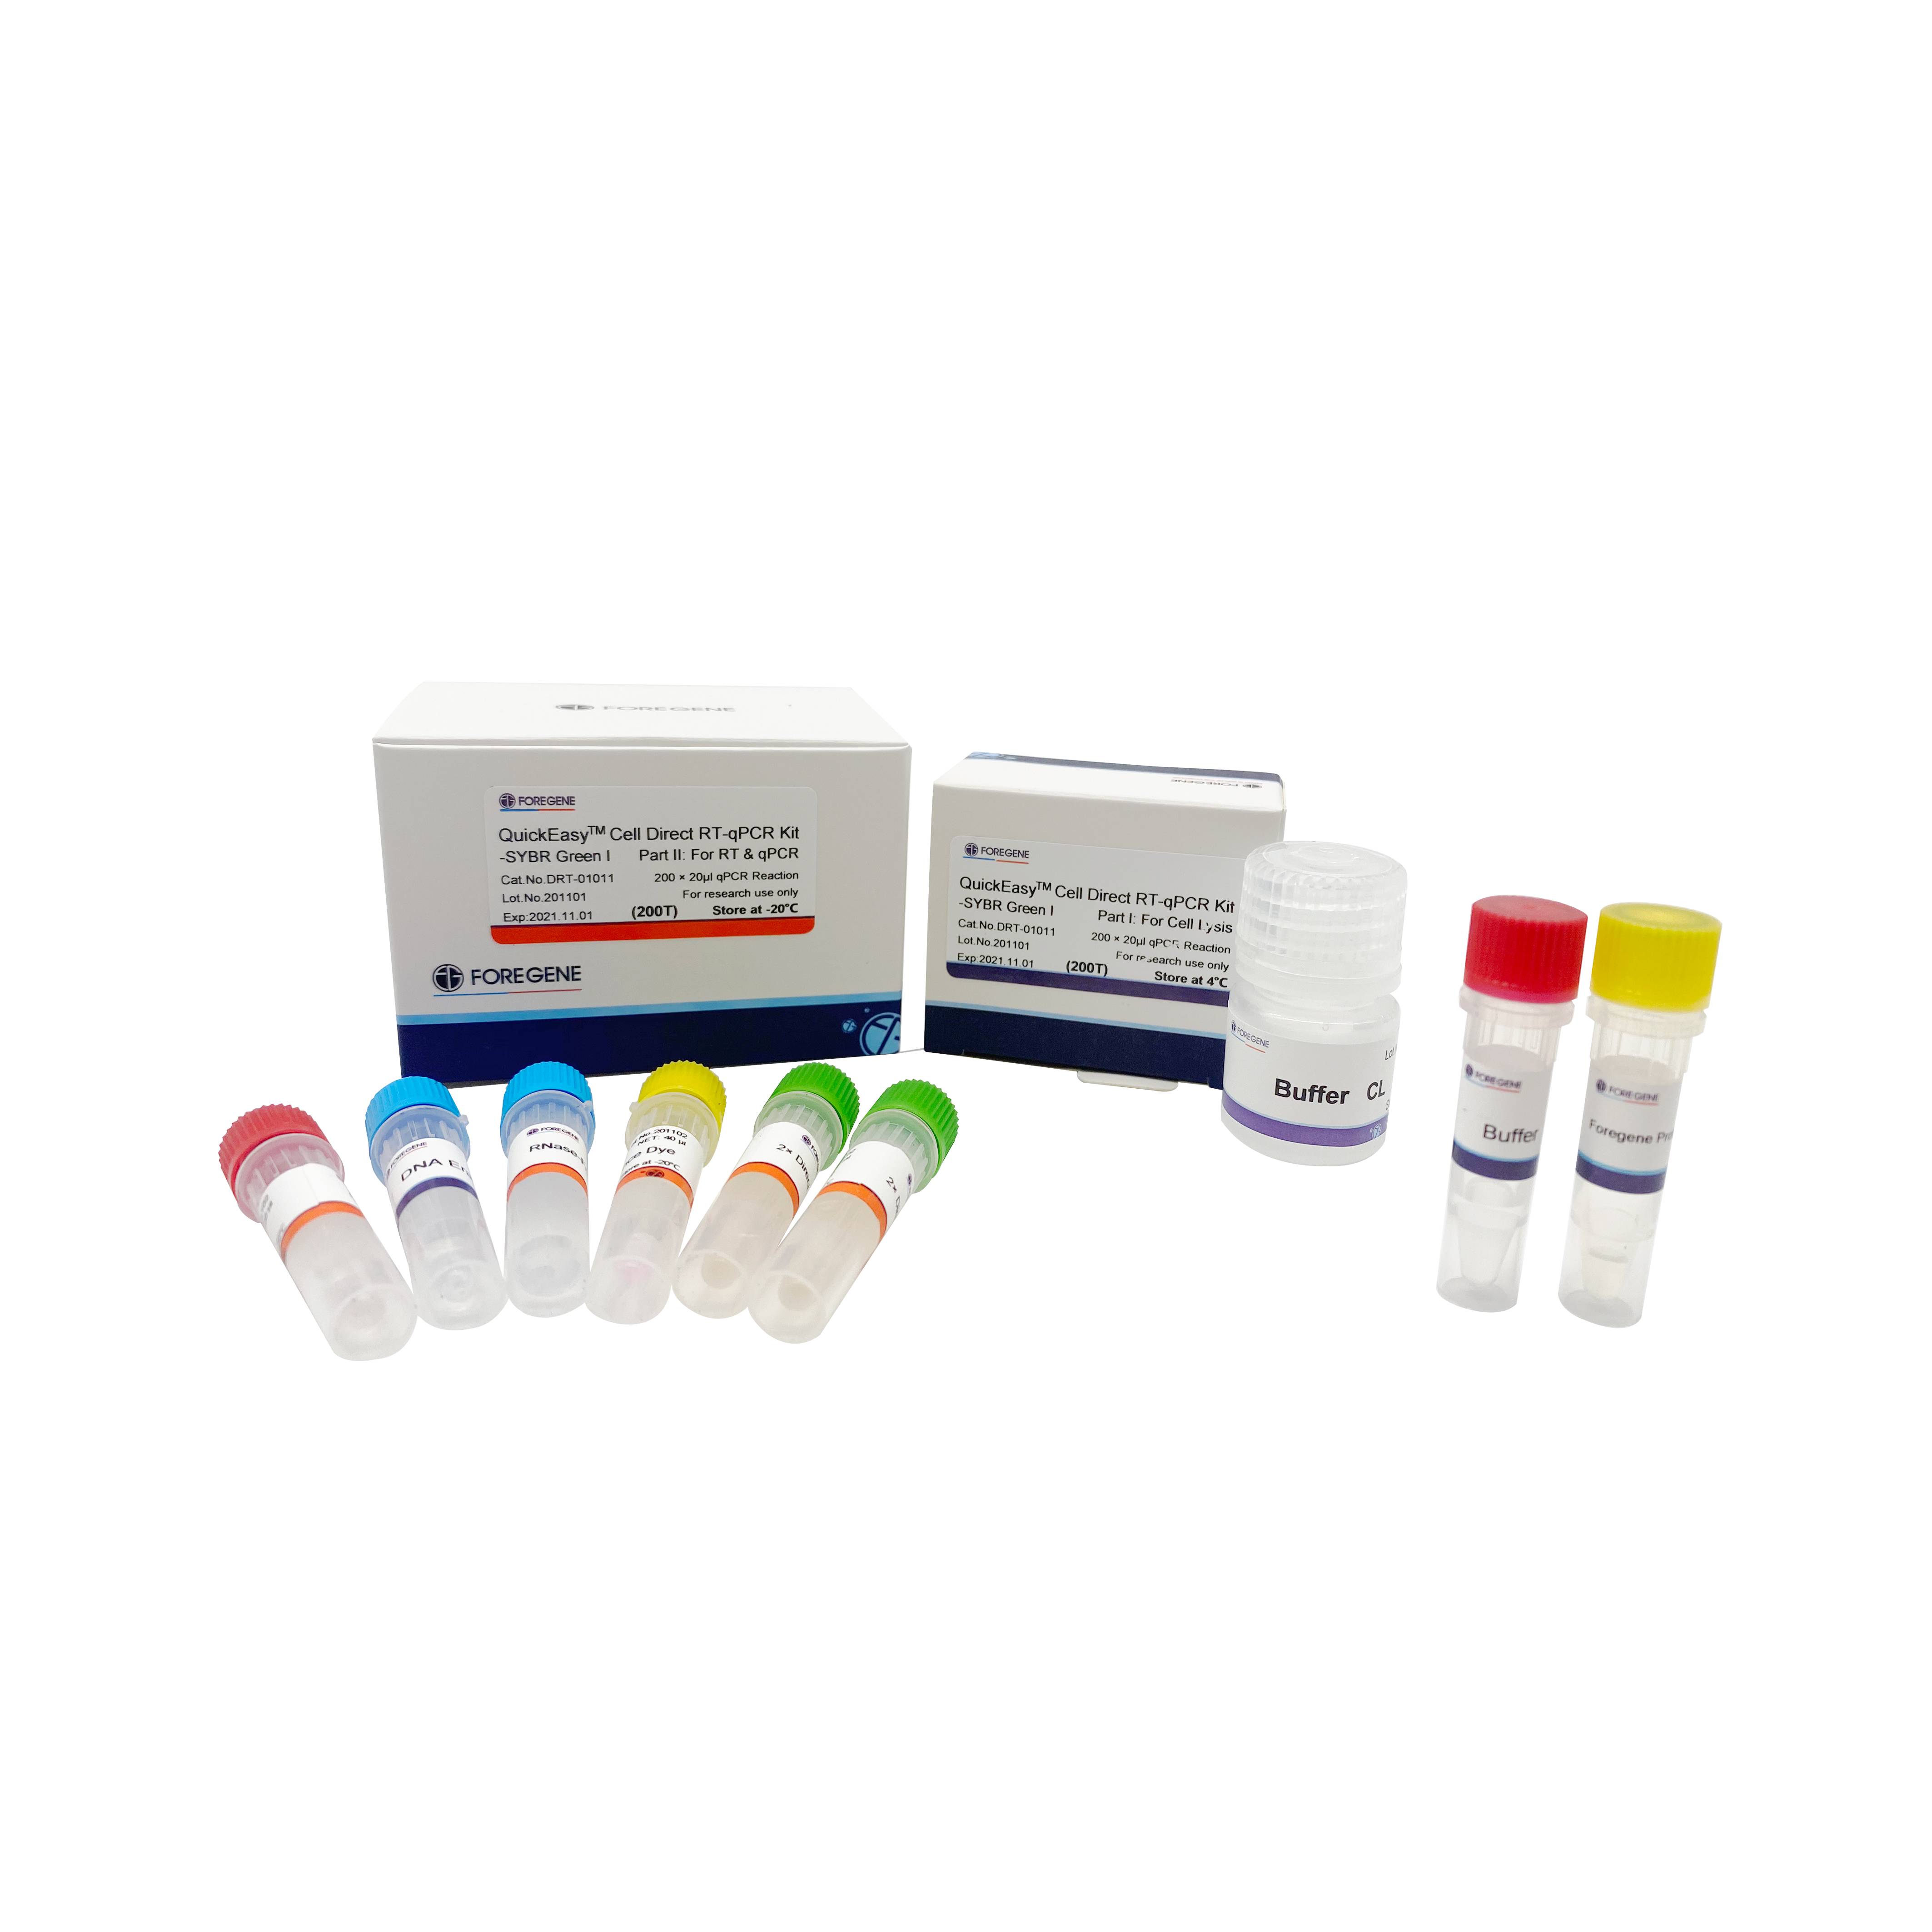 Cell Direct RT qPCR Kit—SYBR GREEN I Direct Cell Lysis Cell Ready One-step qRT-PCR Kits